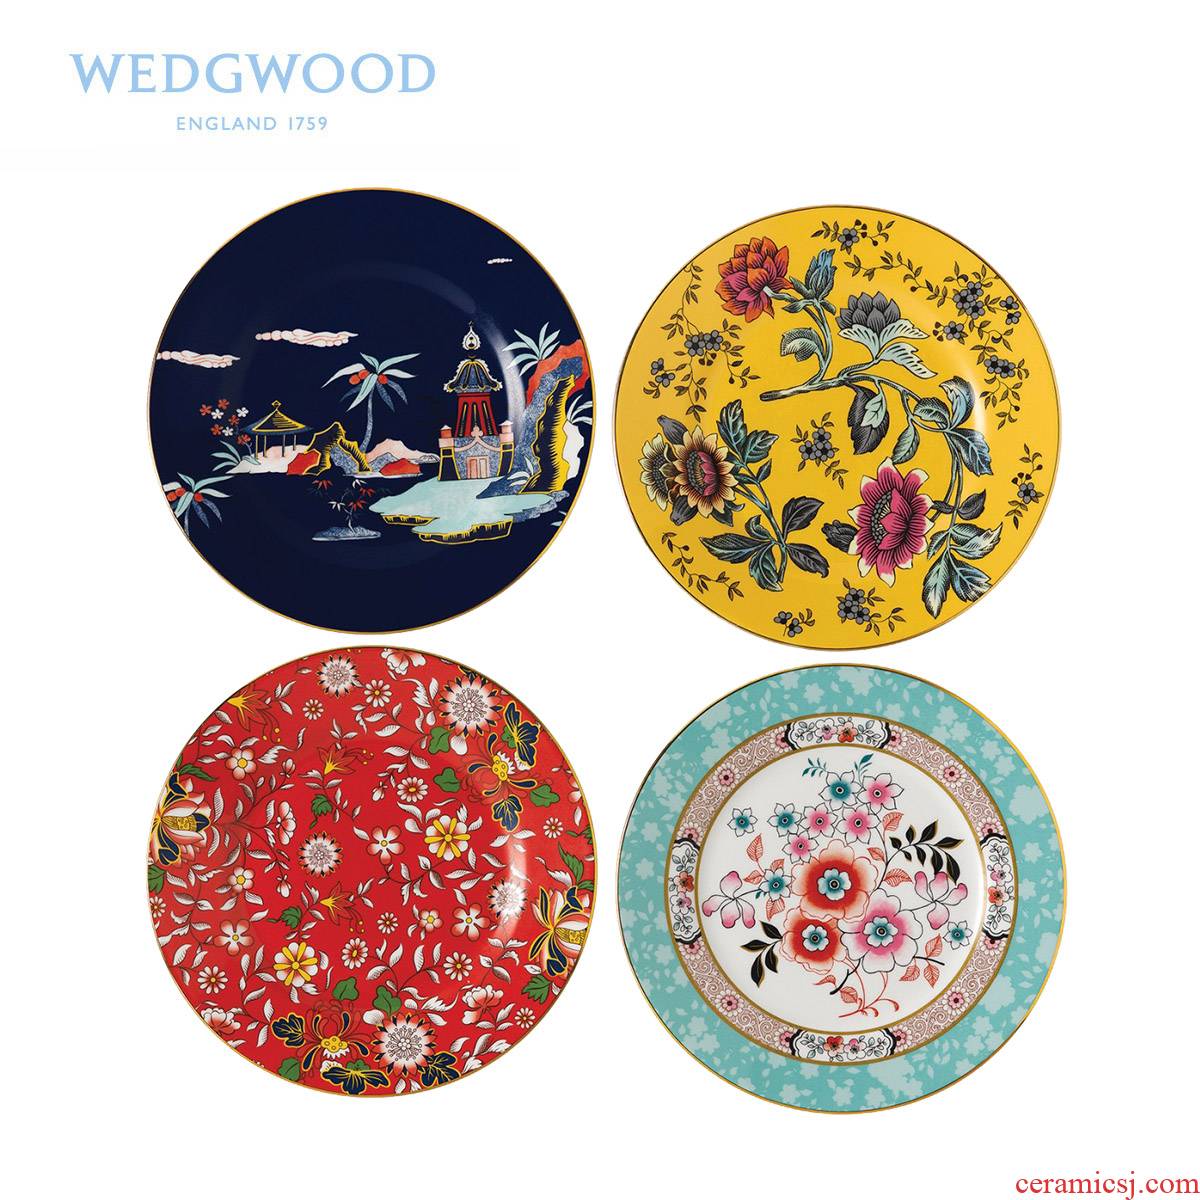 British Wedgwood roaming the condition four series of 20 cm ipads porcelain plate to decorate/snack plate